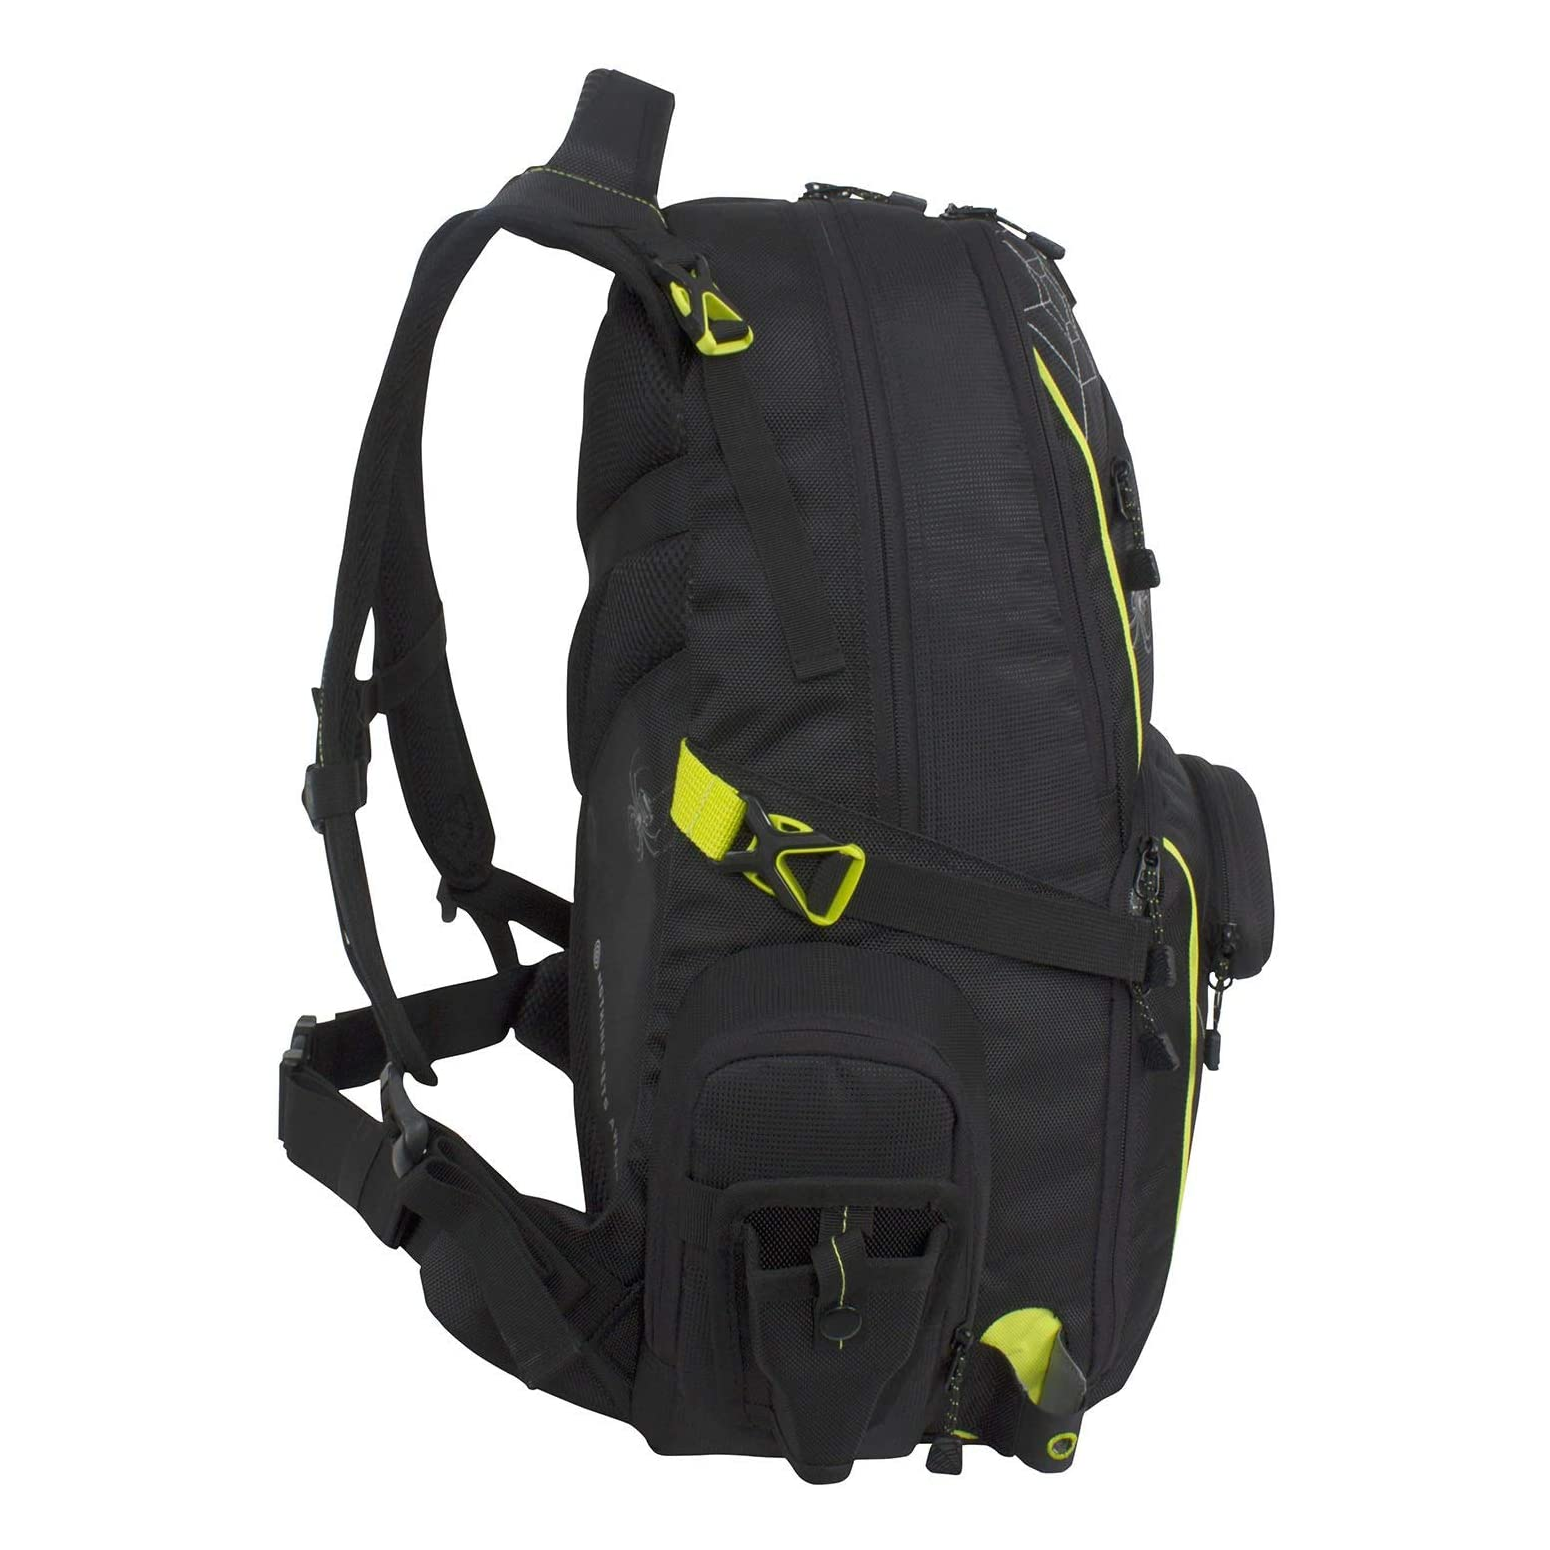 https://backpacks.global/compare/wp-content/uploads/Spiderwire-Fishing-Tackle-Backpack-Side-View.png